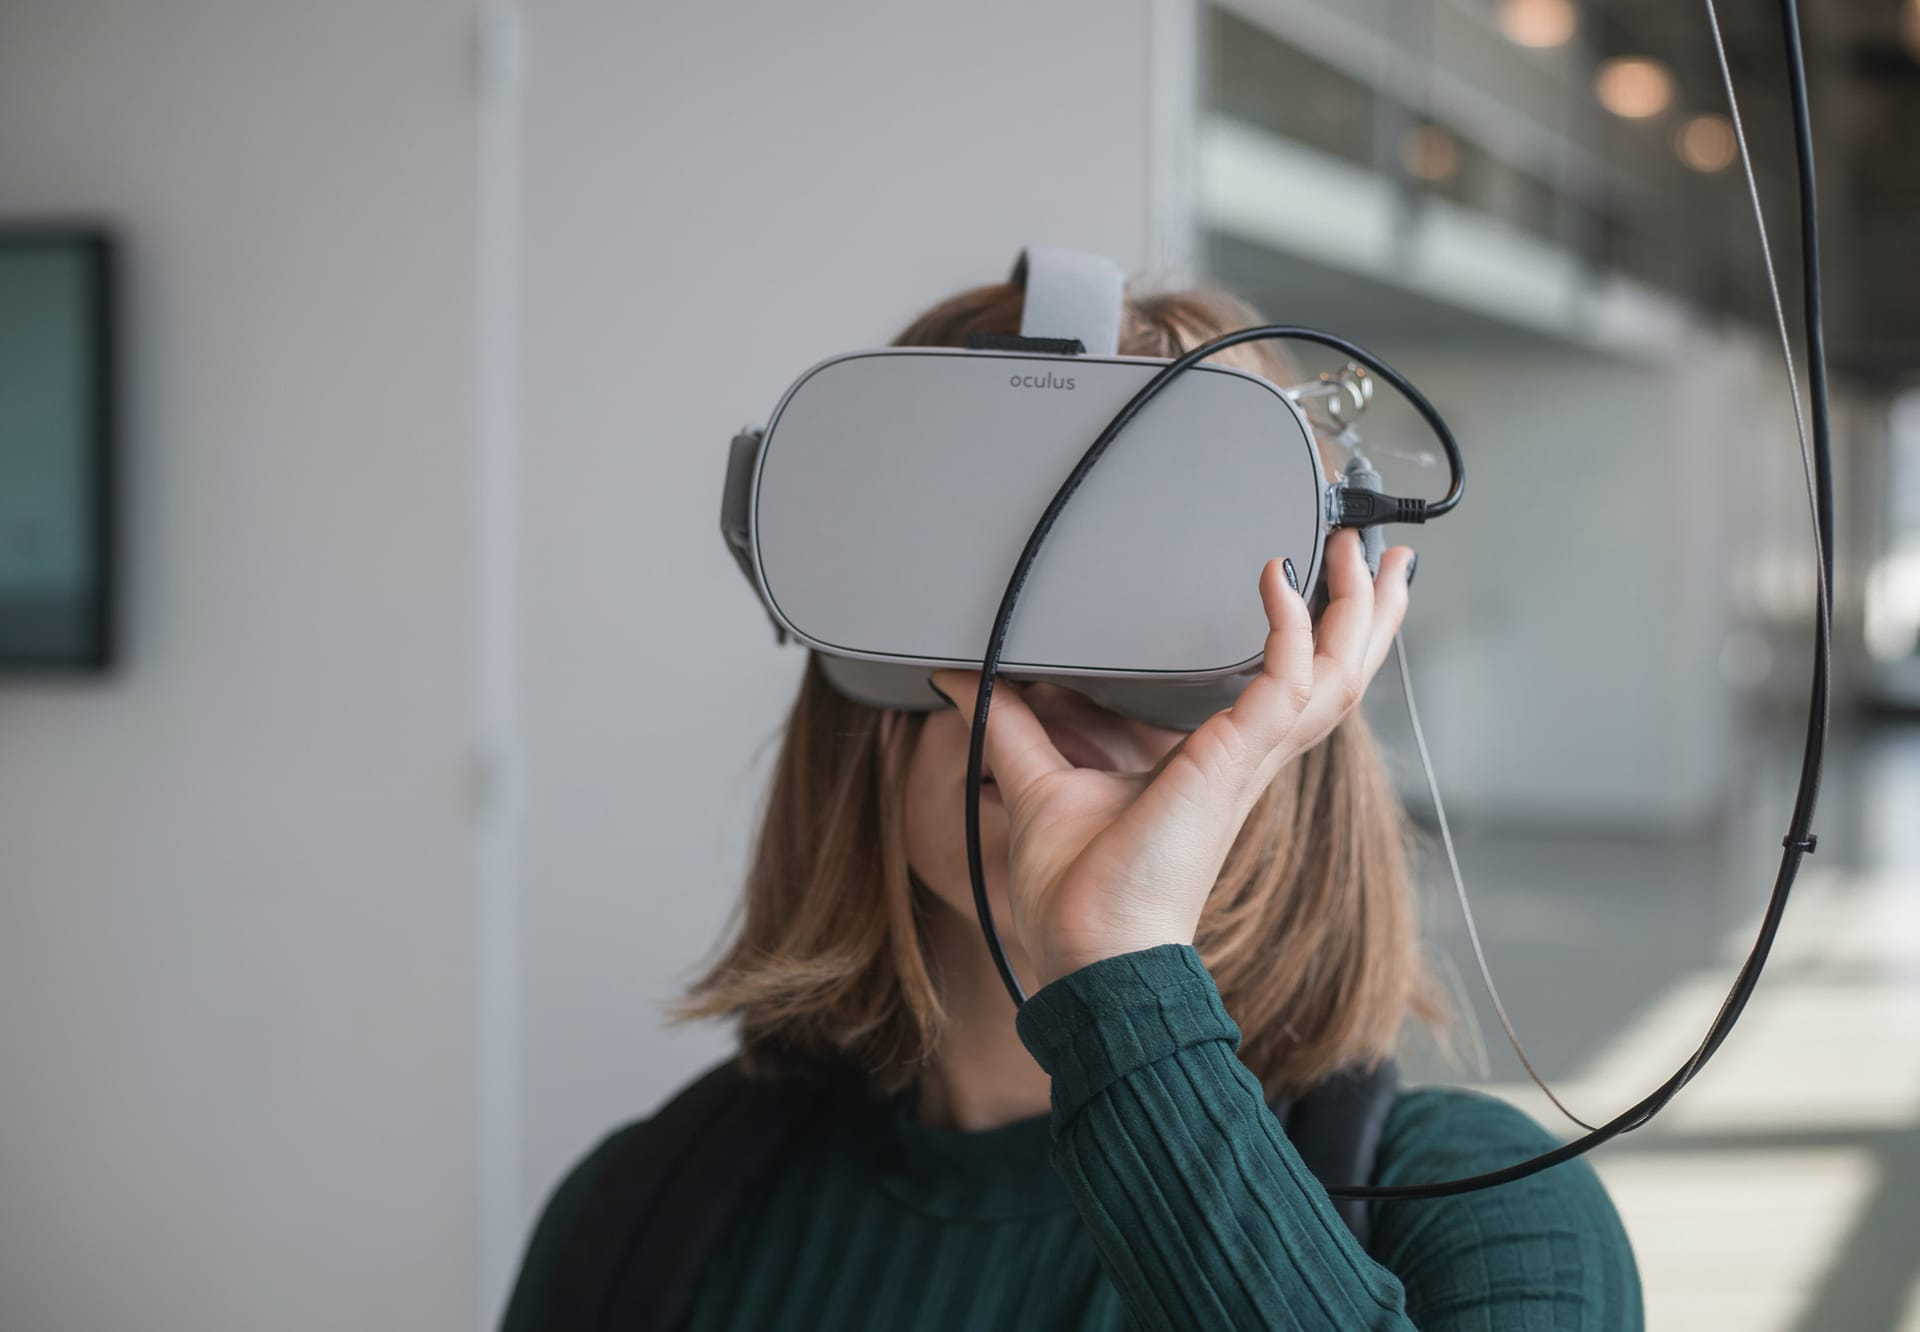 5 creative VR use cases in 2022